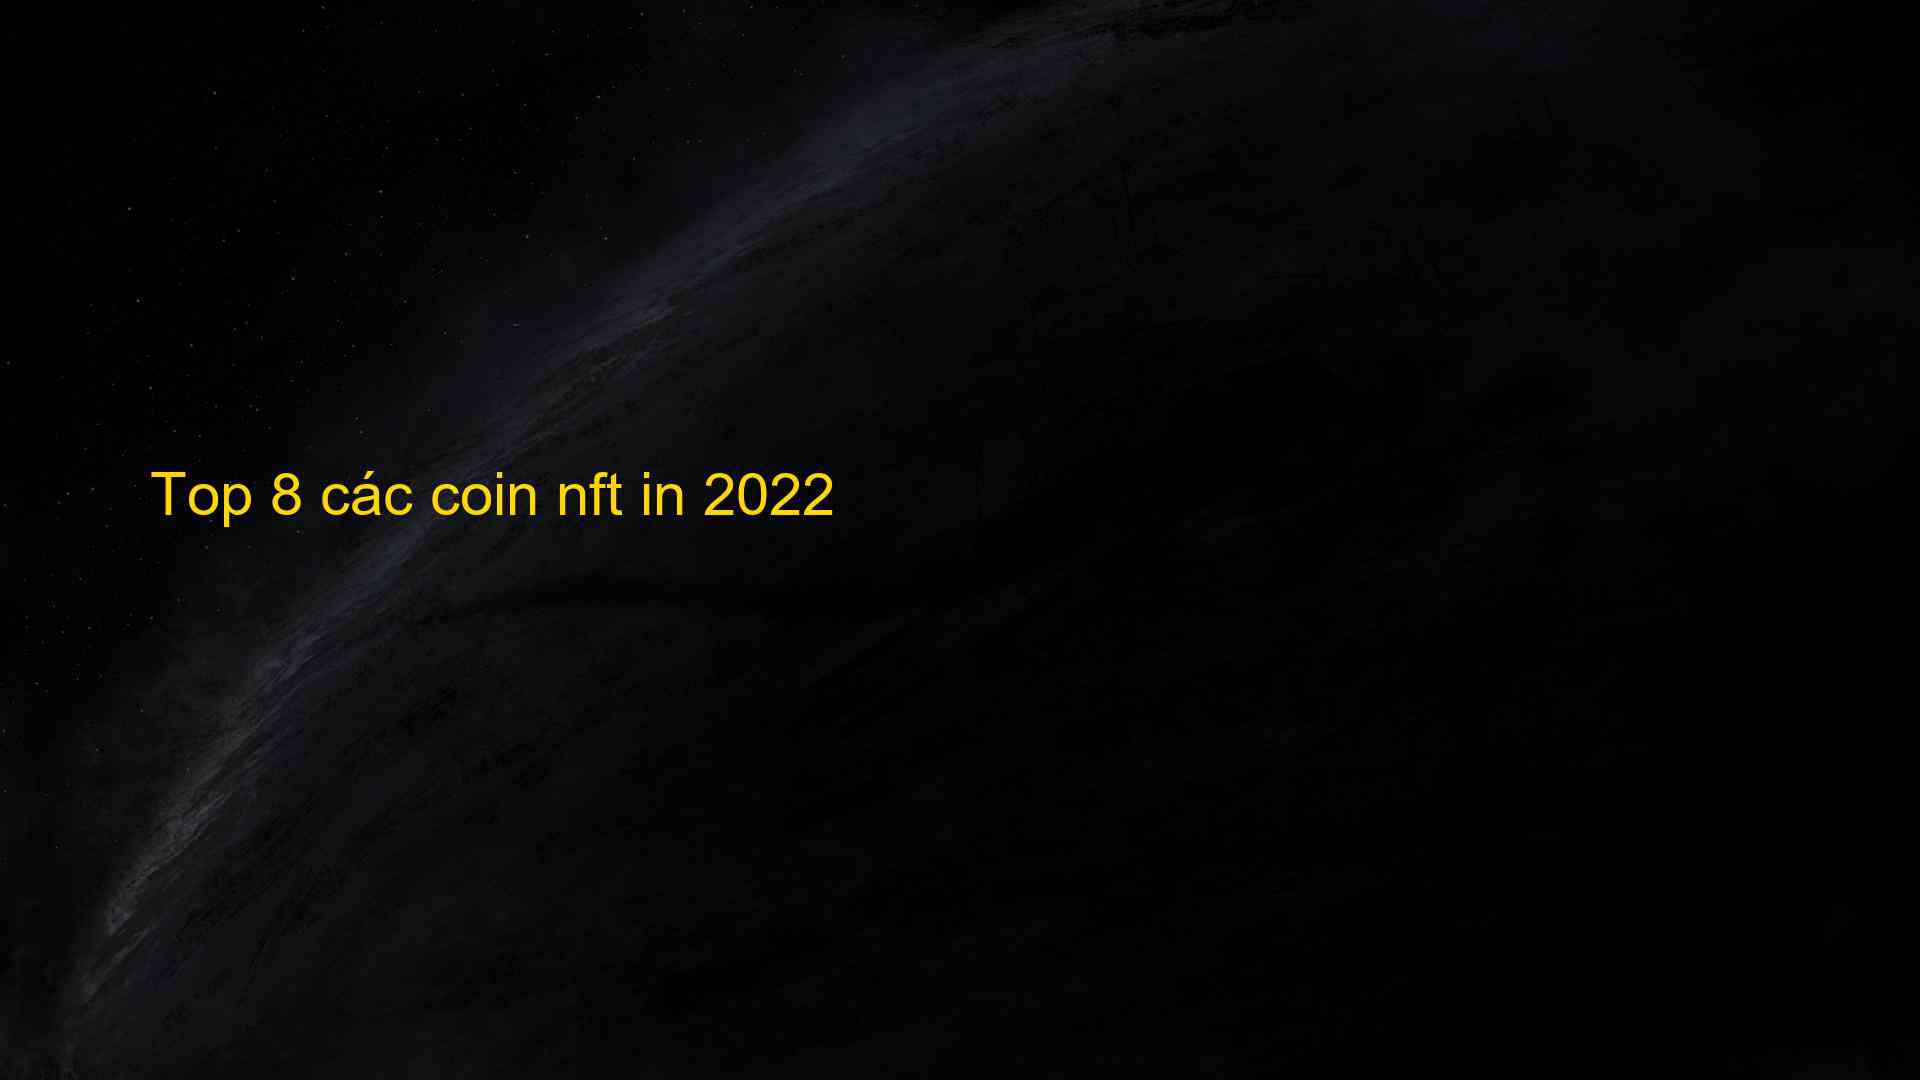 Top 8 cac coin nft in 2022 1659956656